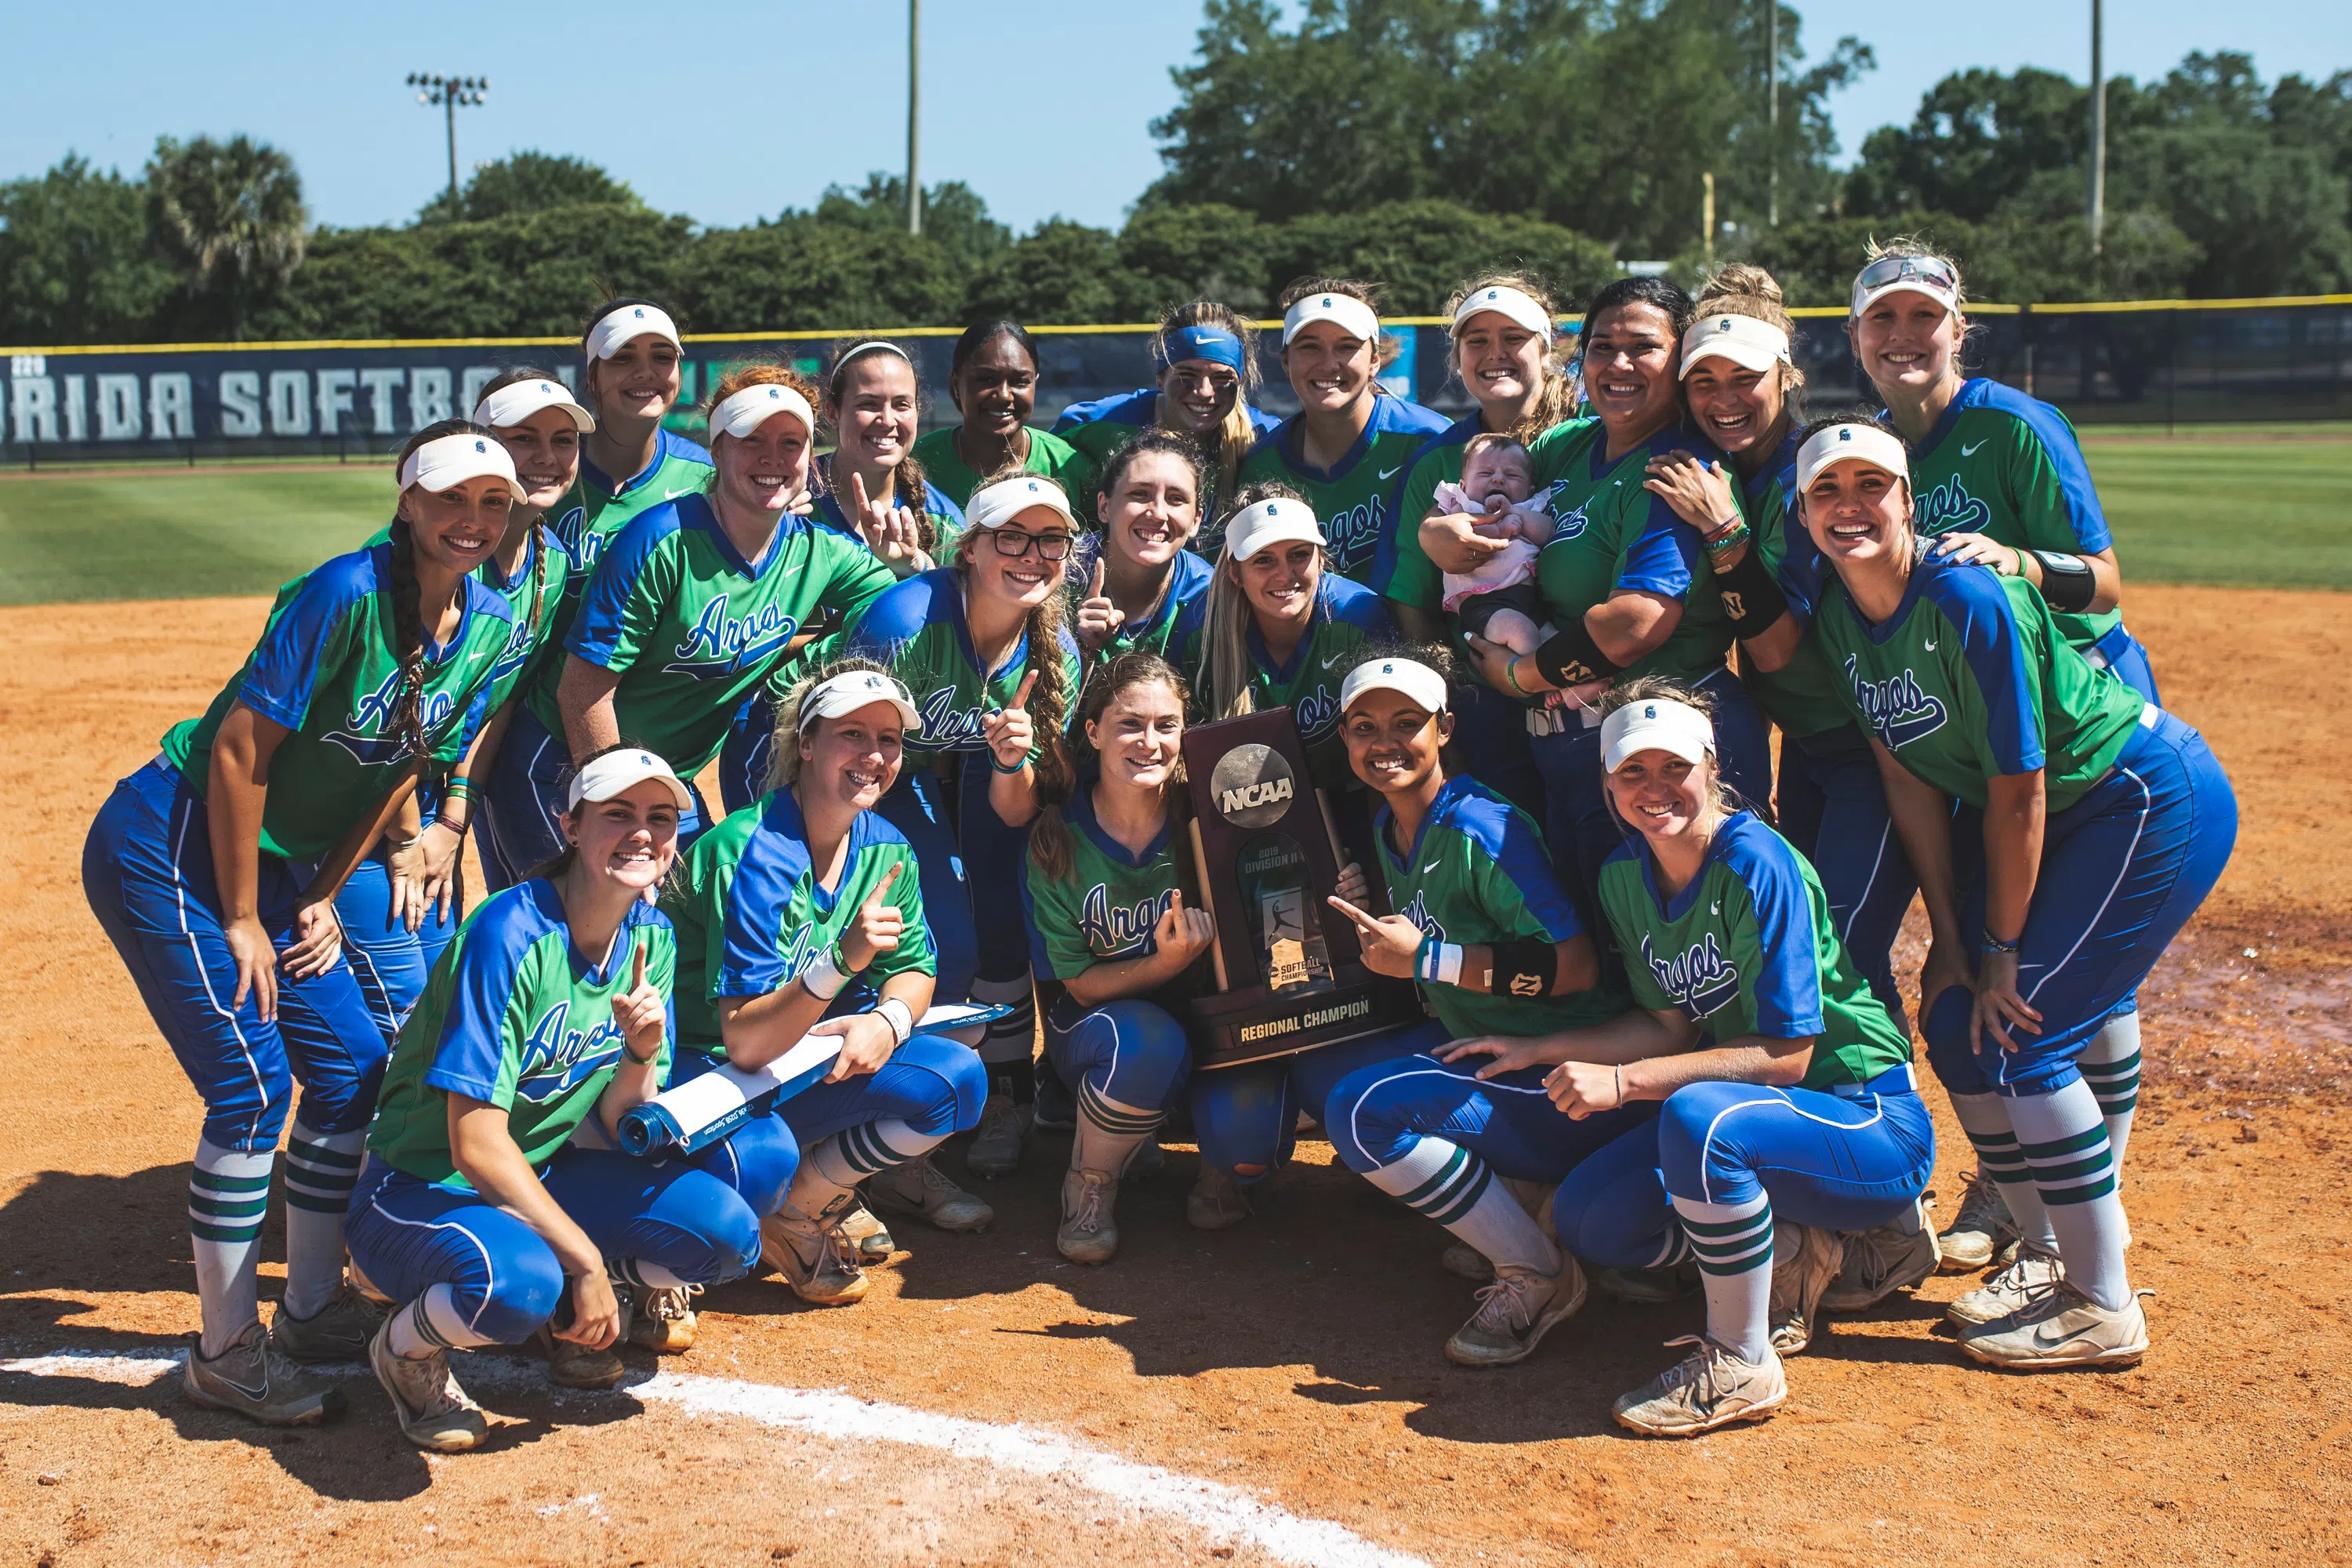 Softball team poses on field with championship trophy.